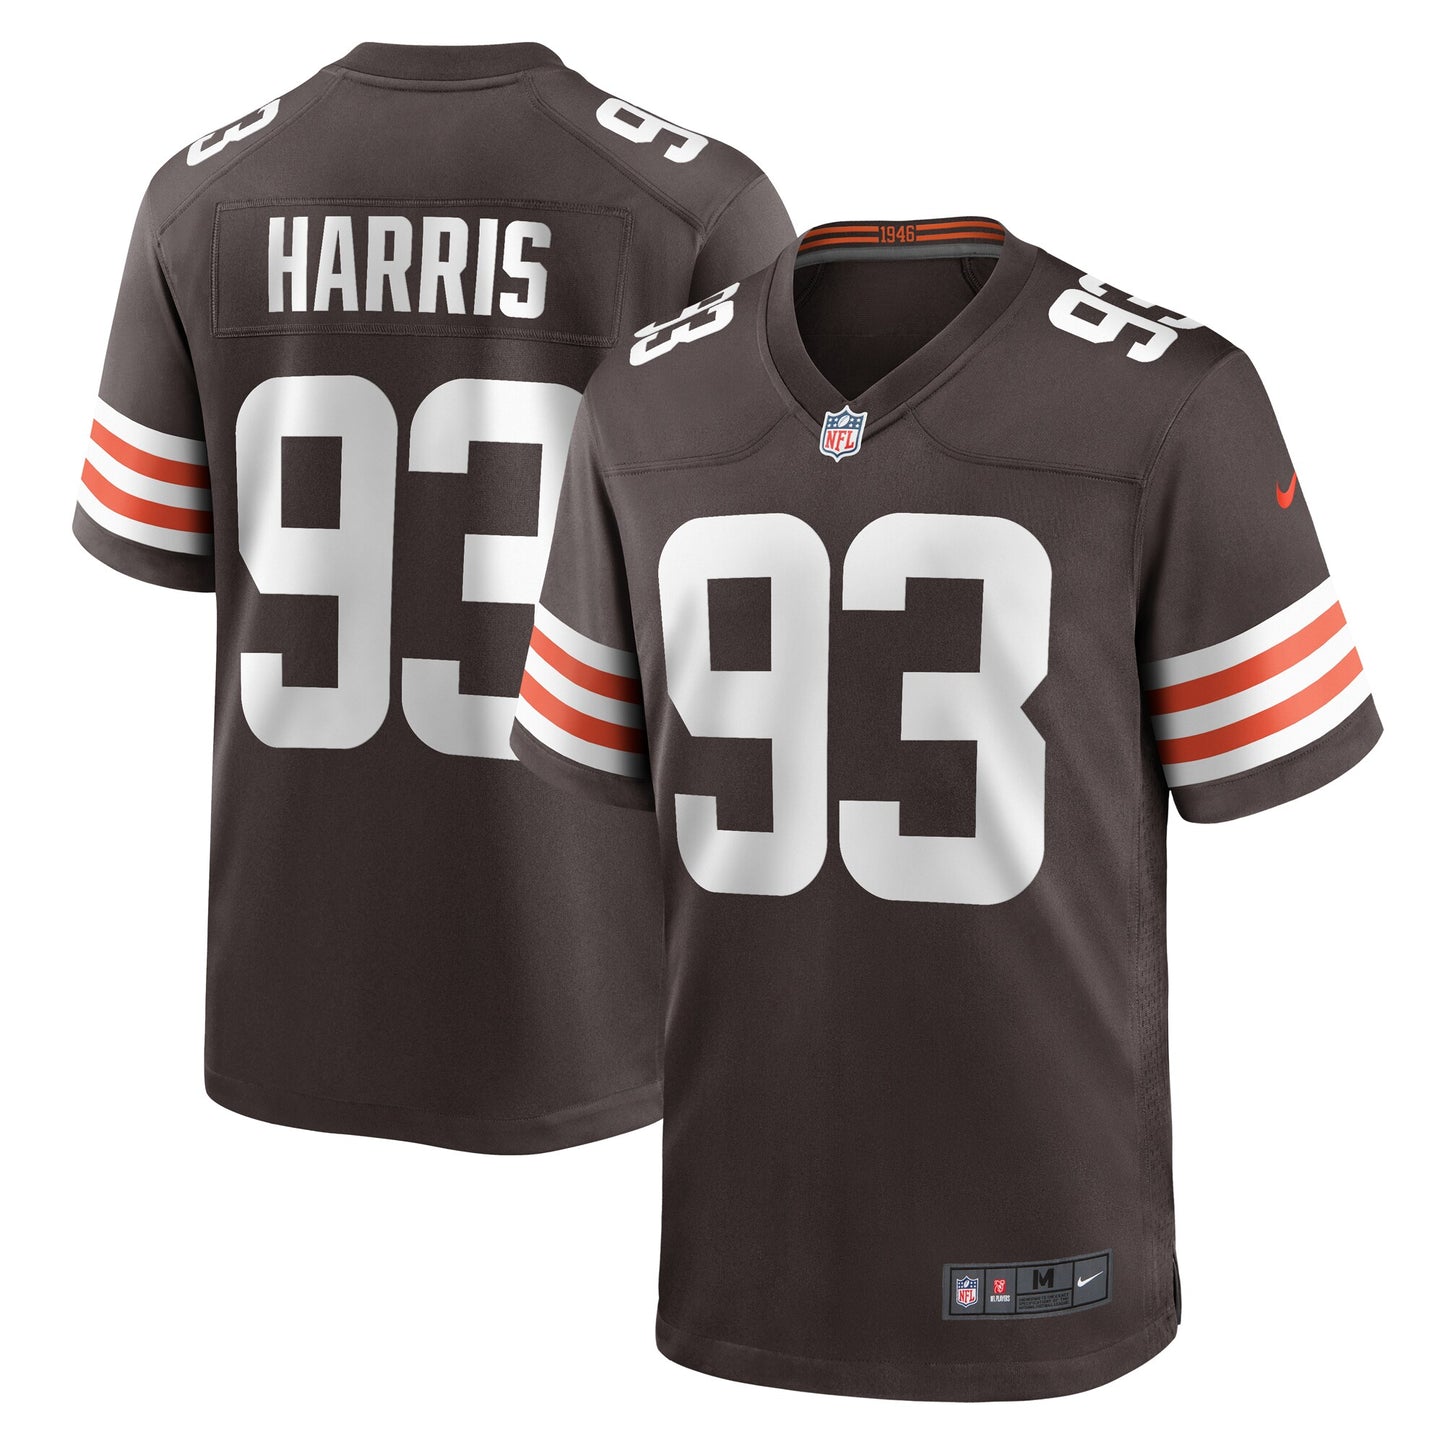 Shelby Harris Cleveland Browns Nike Team Game Jersey -  Brown